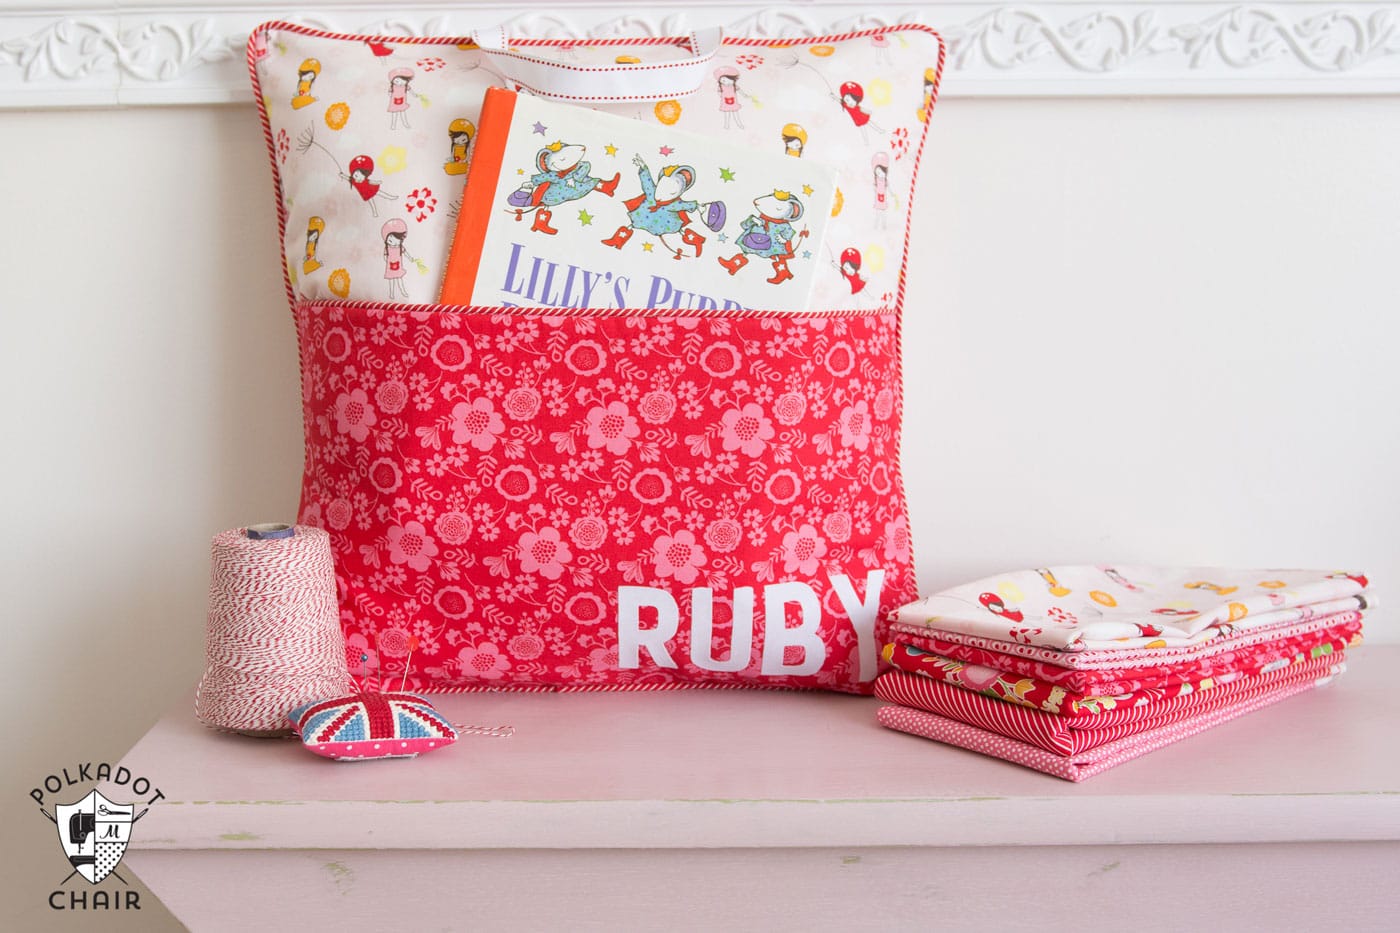 How to sew a personalized reading pillow with a pocket and handle - free sewing pattern and tutorial on polkadotchair.com